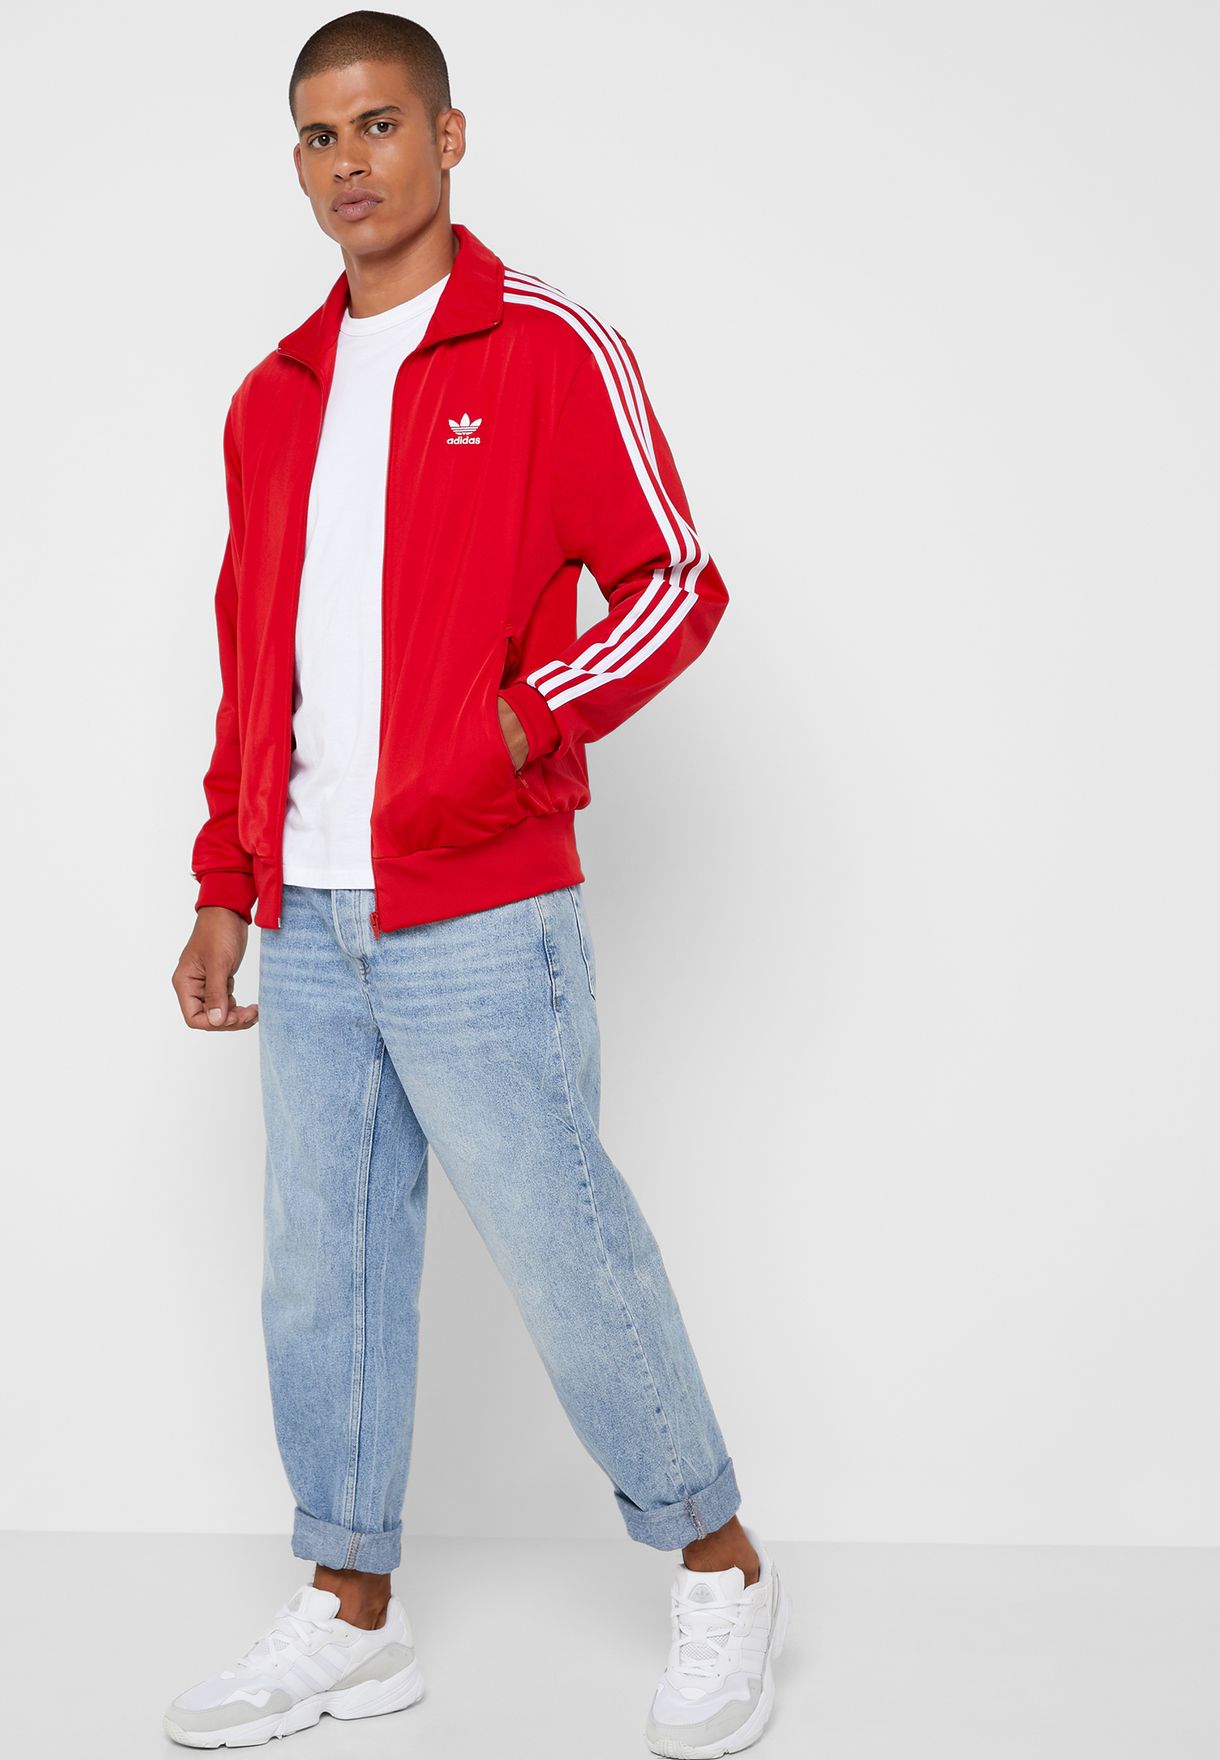 Buy > red adidas jacket outfit > in stock